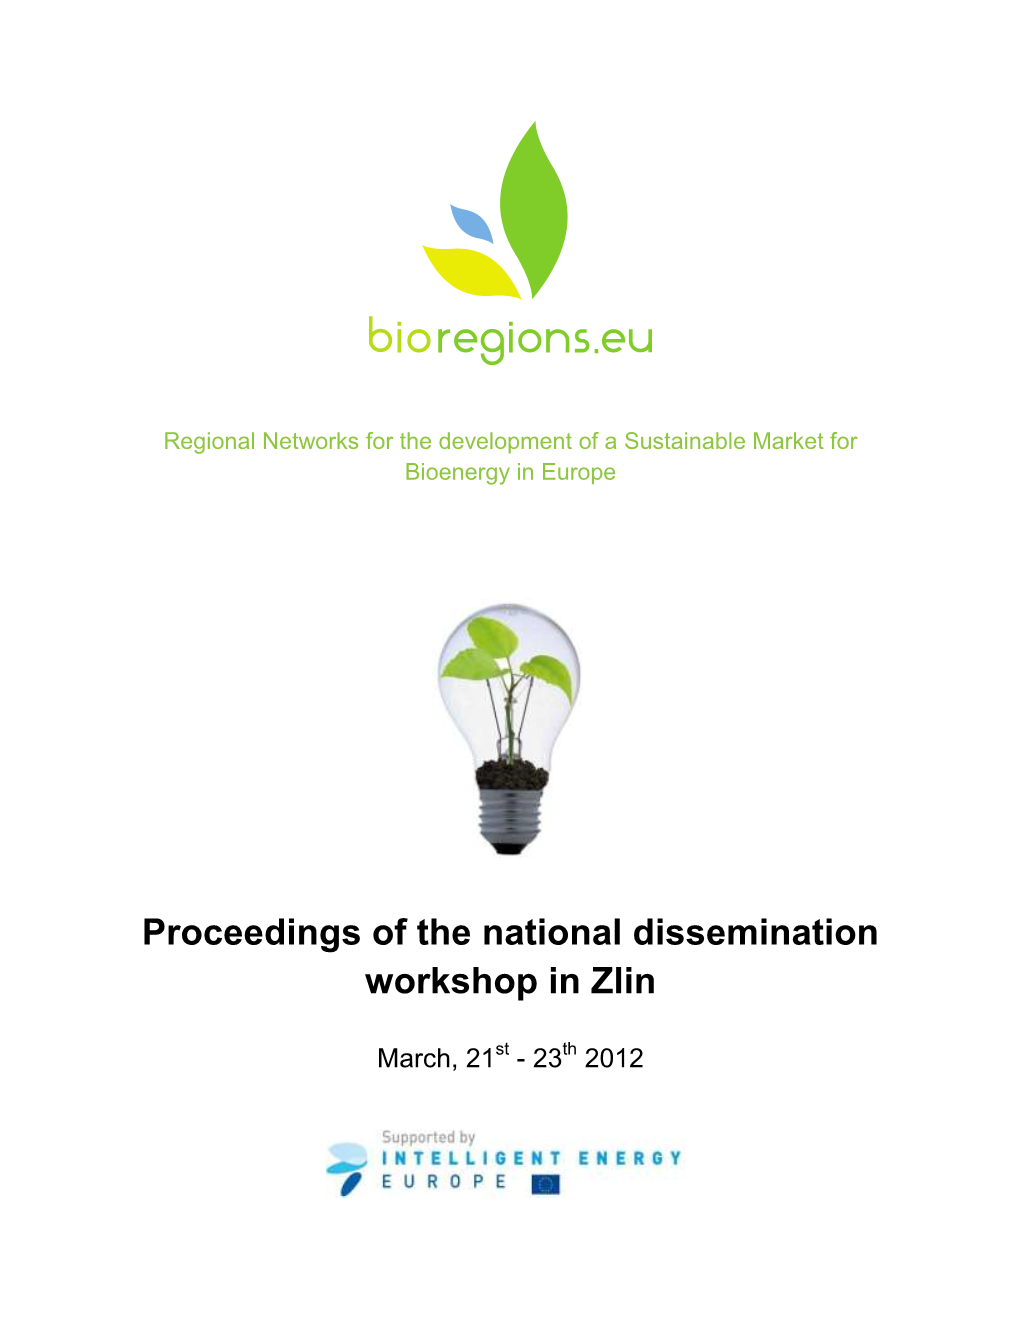 Proceedings of the National Dissemination Workshop in Zlin